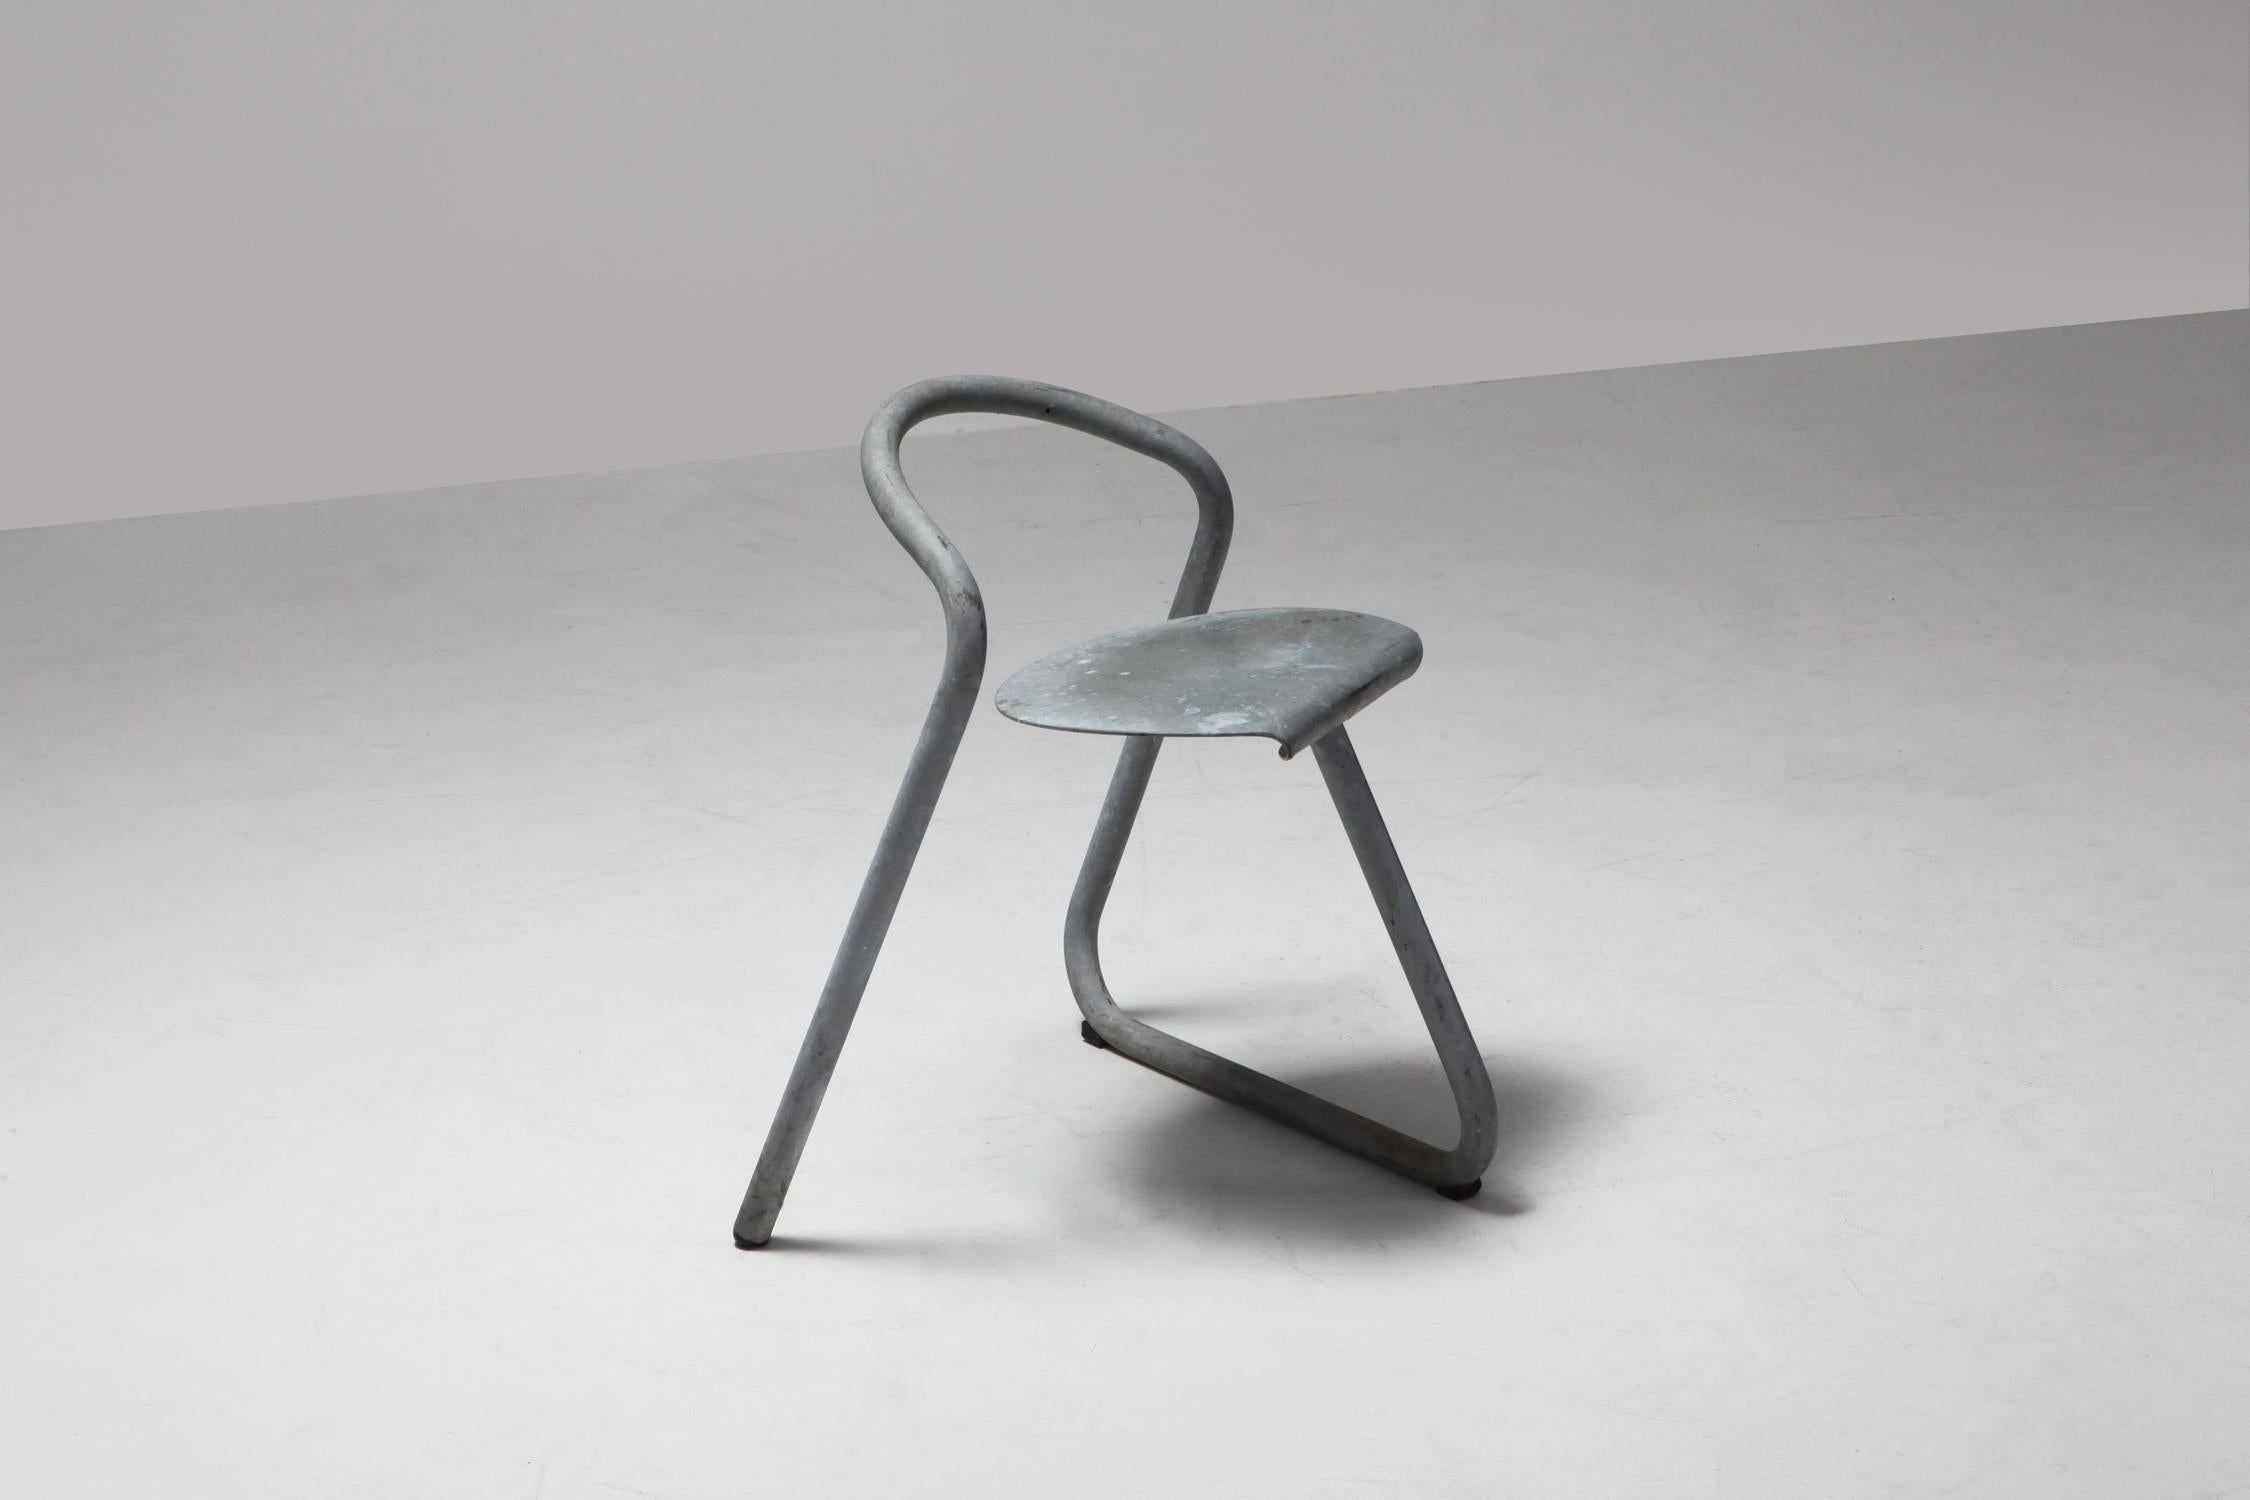 Post-modern chair which uses the tube as perpetual inspiration, by Erik Magnussen. The chair was designed for famous Copenhagen based design warehouse Paustian in 1989. An identical chair is added to the chair collection of the Technical University